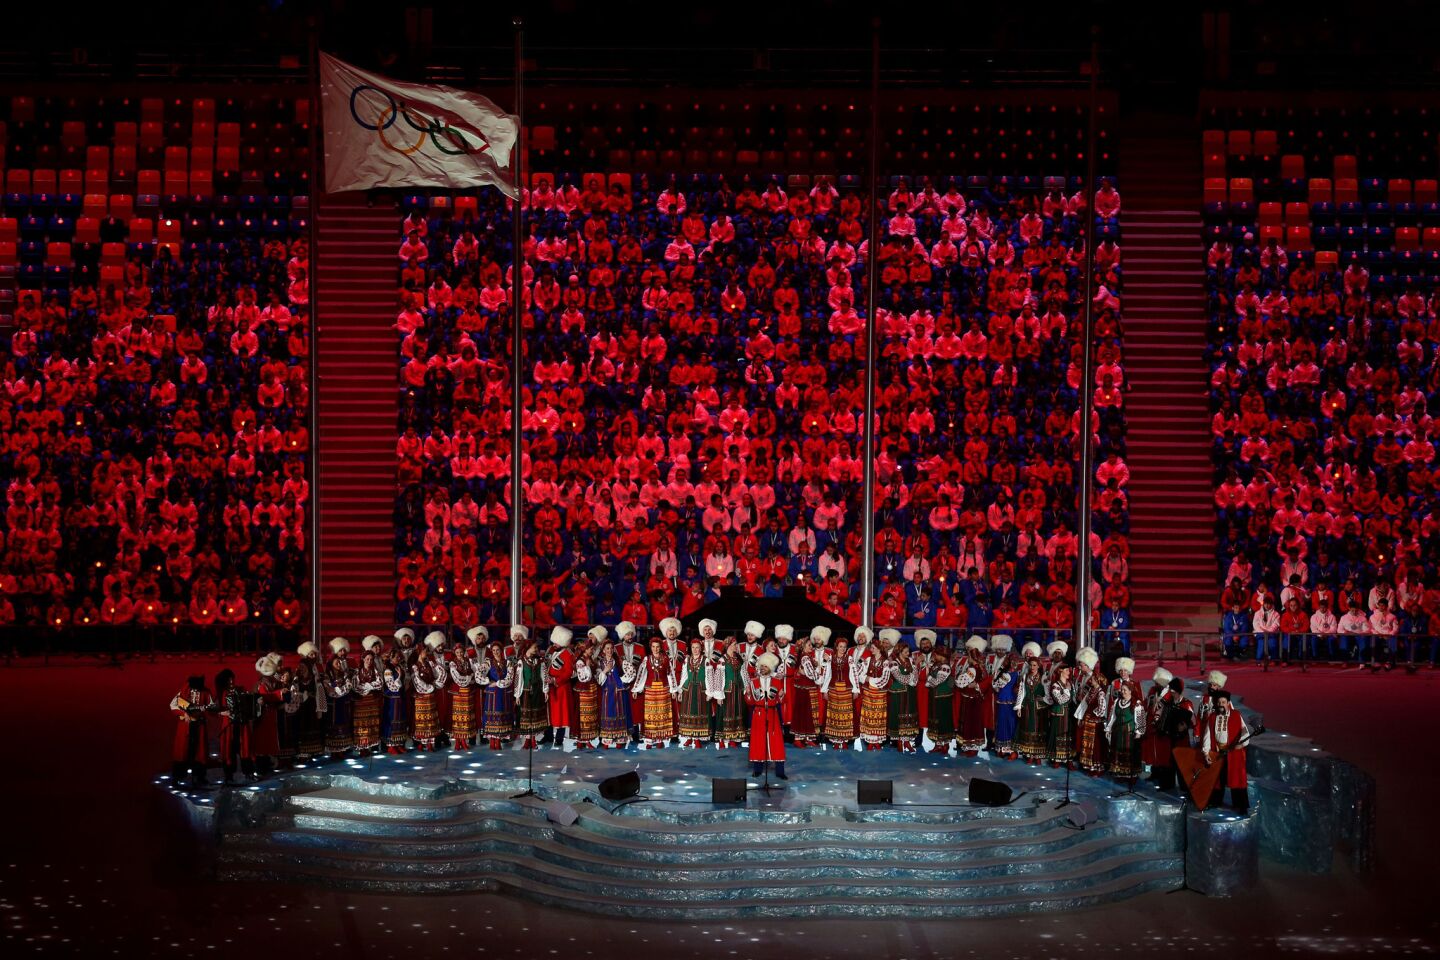 A pre-show performance by the Kuban Cossack Choir during the 2014 Sochi Winter Olympics Closing Ceremony at Fisht Olympic Stadium in Sochi, Russia.